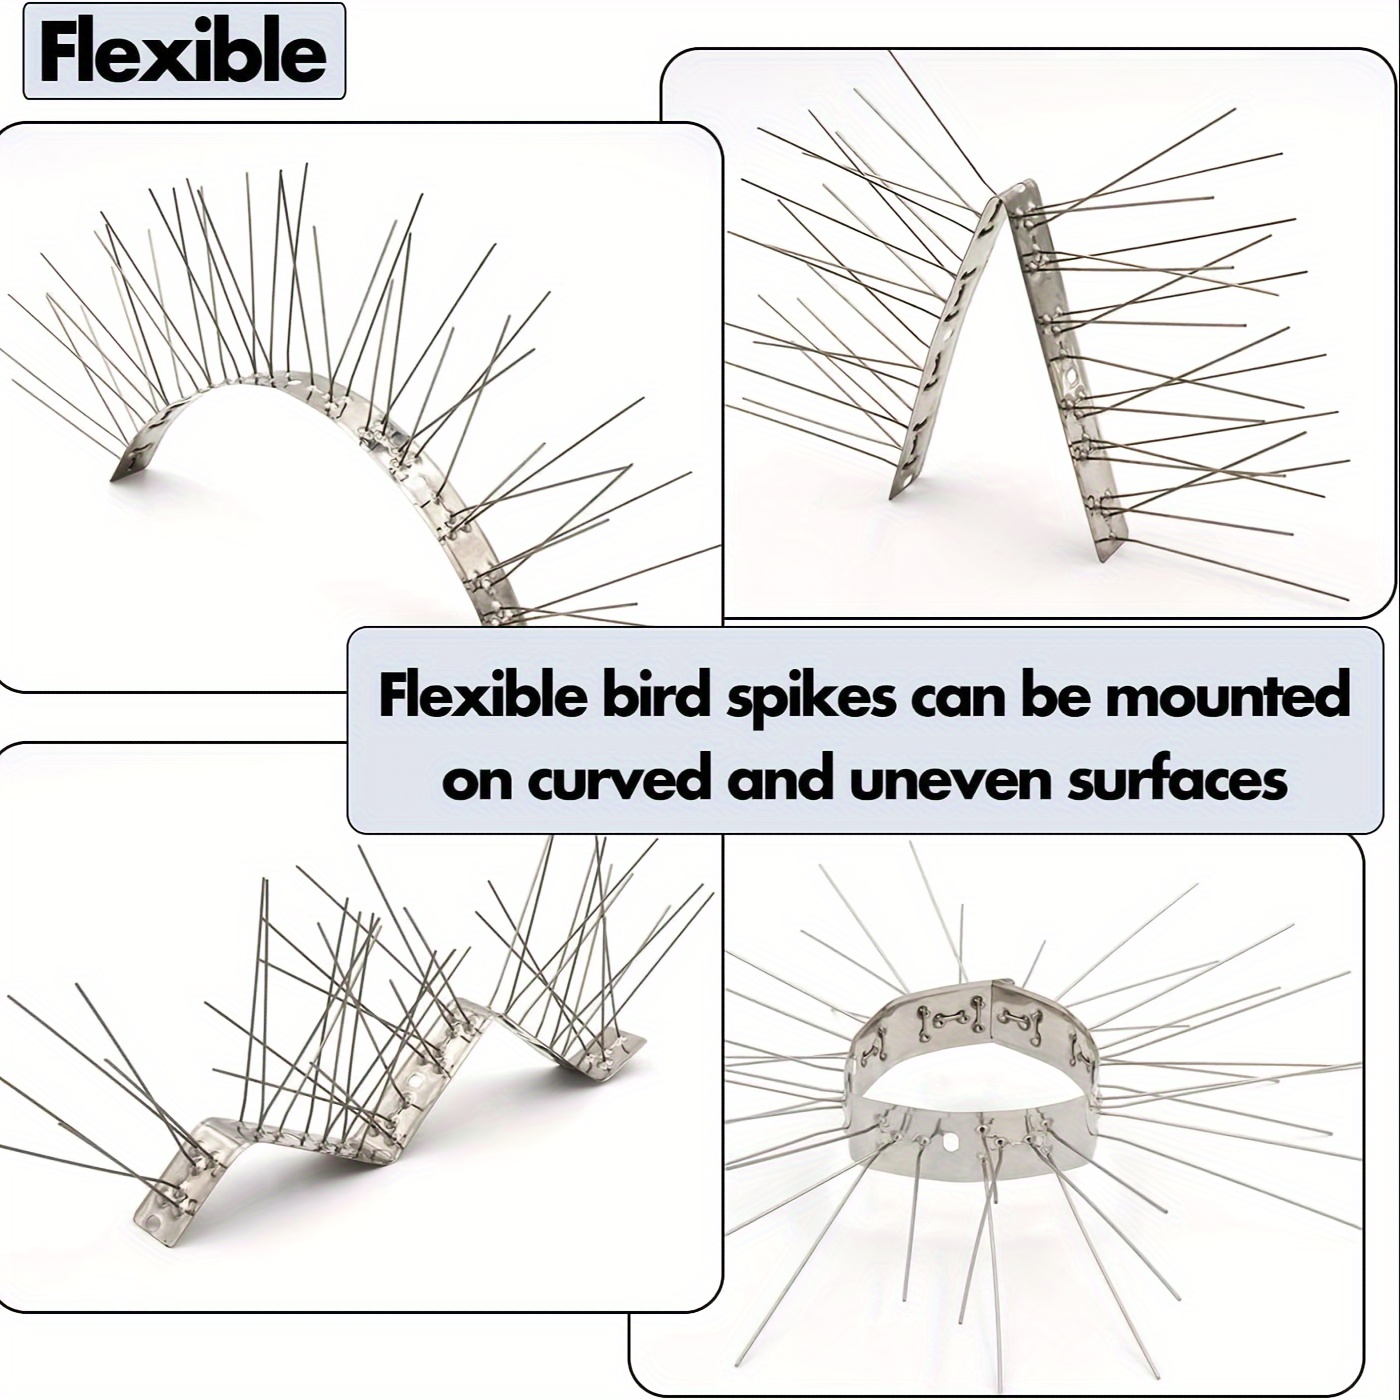 Stainless Steel Bird Spikes, Keep Birds Off Any Surface